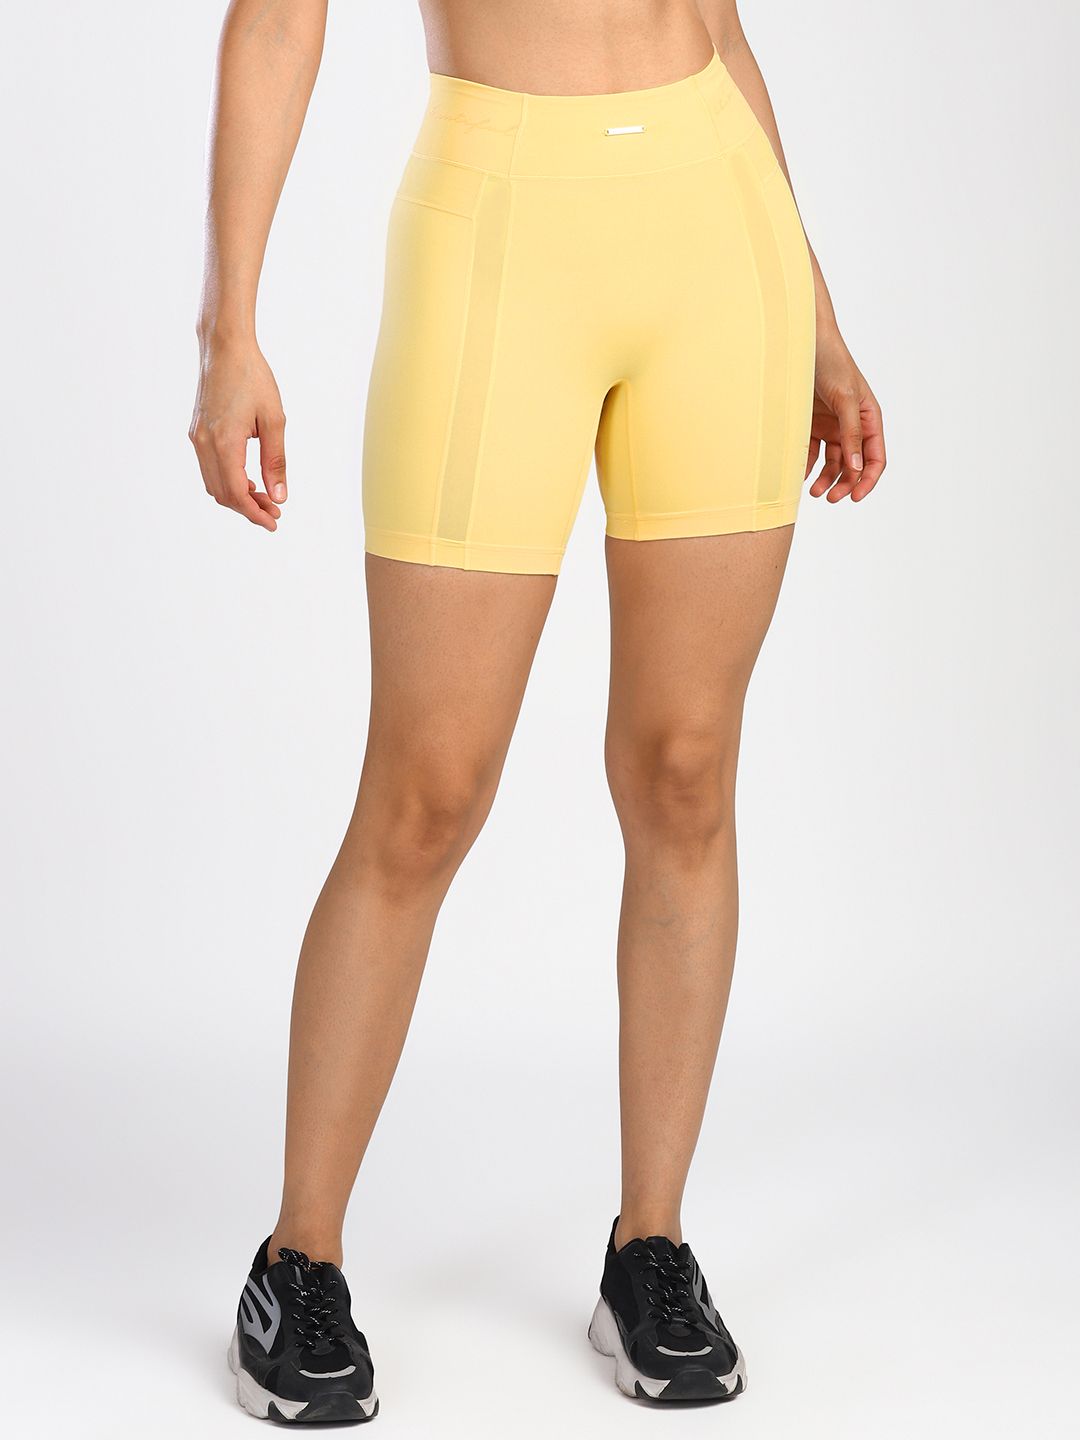 Gymshark Women Cycling Shorts Price in India, Full Specifications & Offers